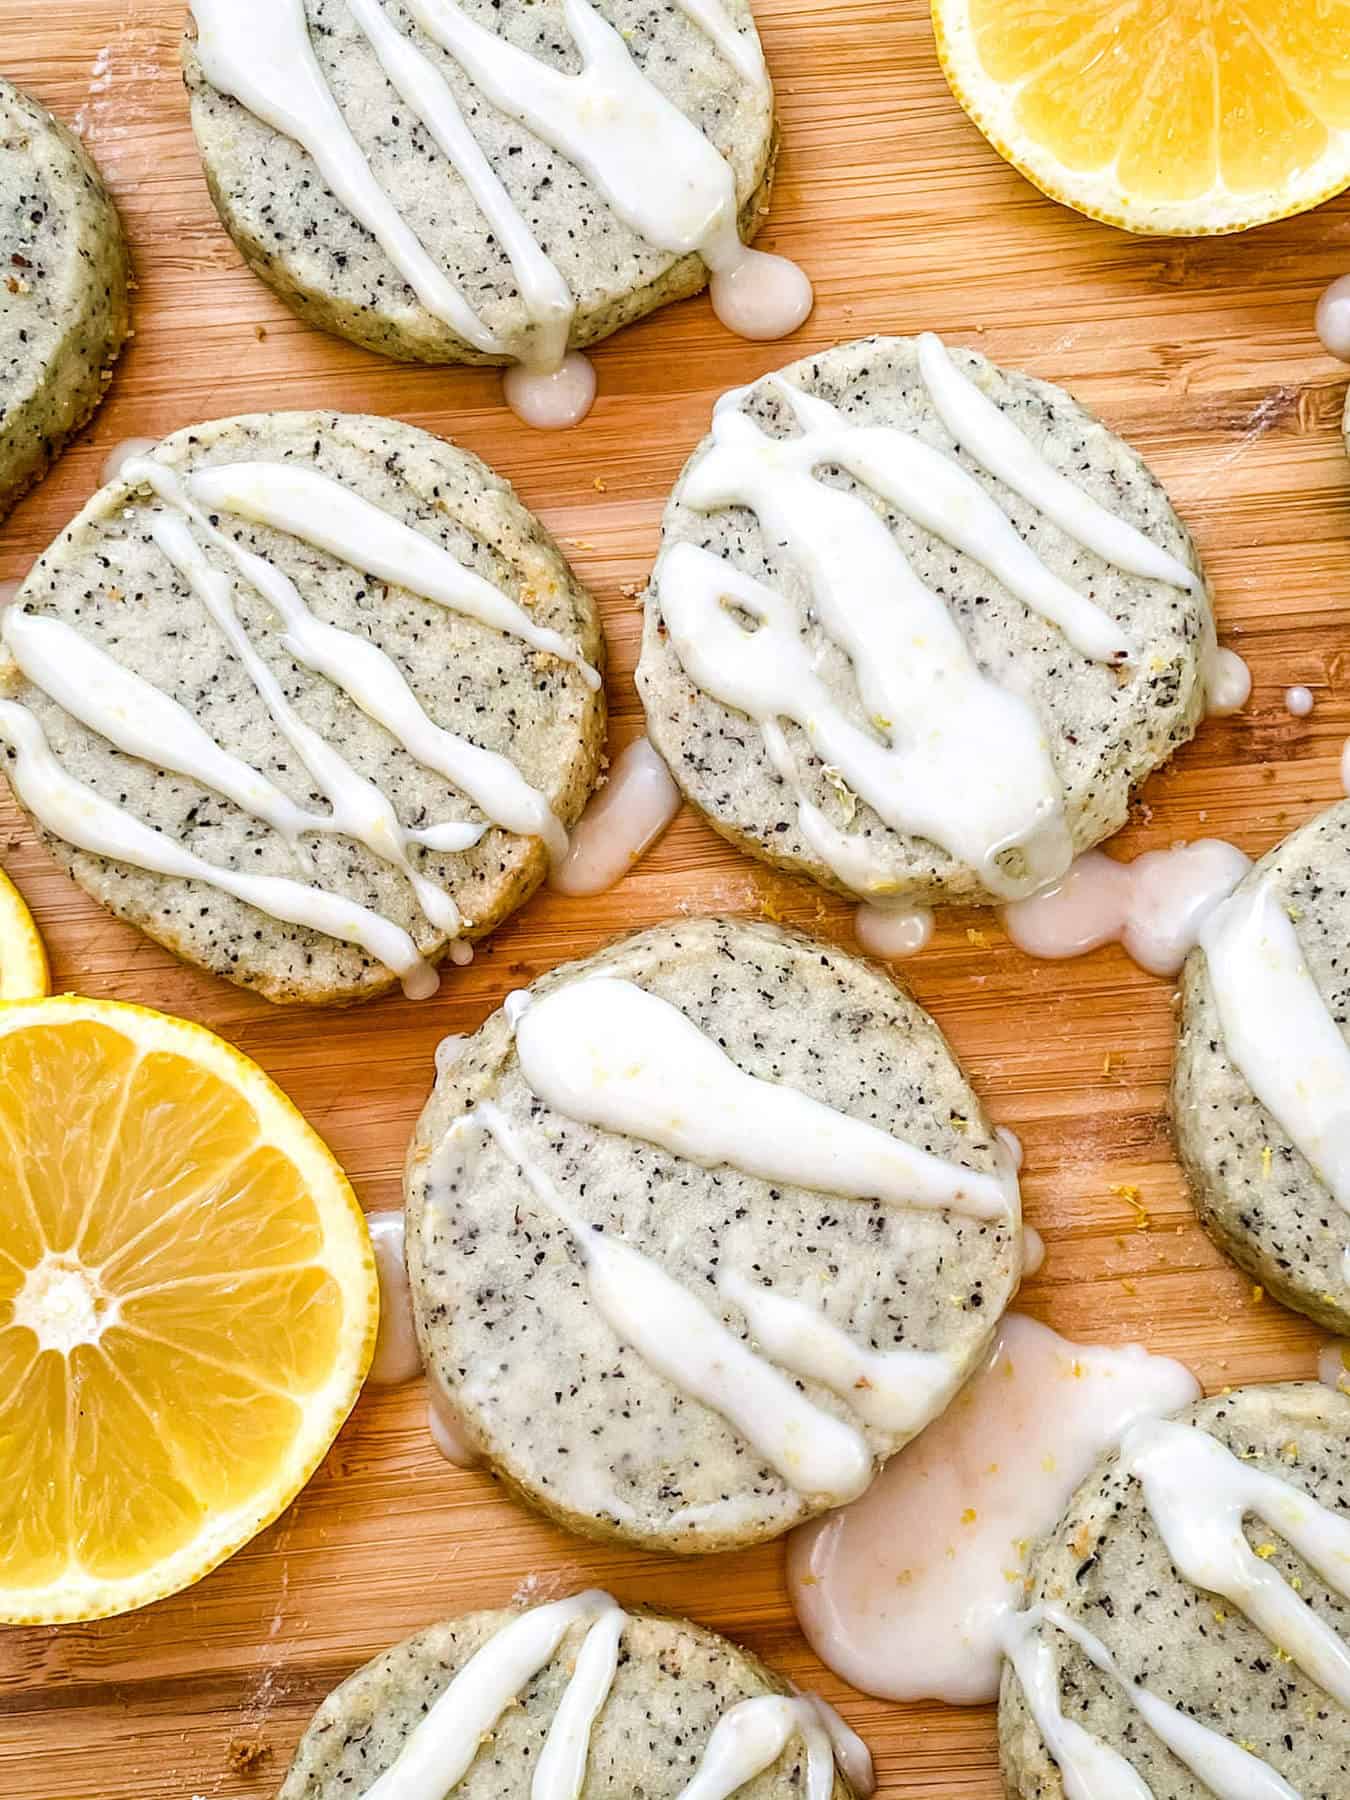 Earl Grey Shortbread Cookies spread out on a cutting board with drizzled glaze and lemon slices